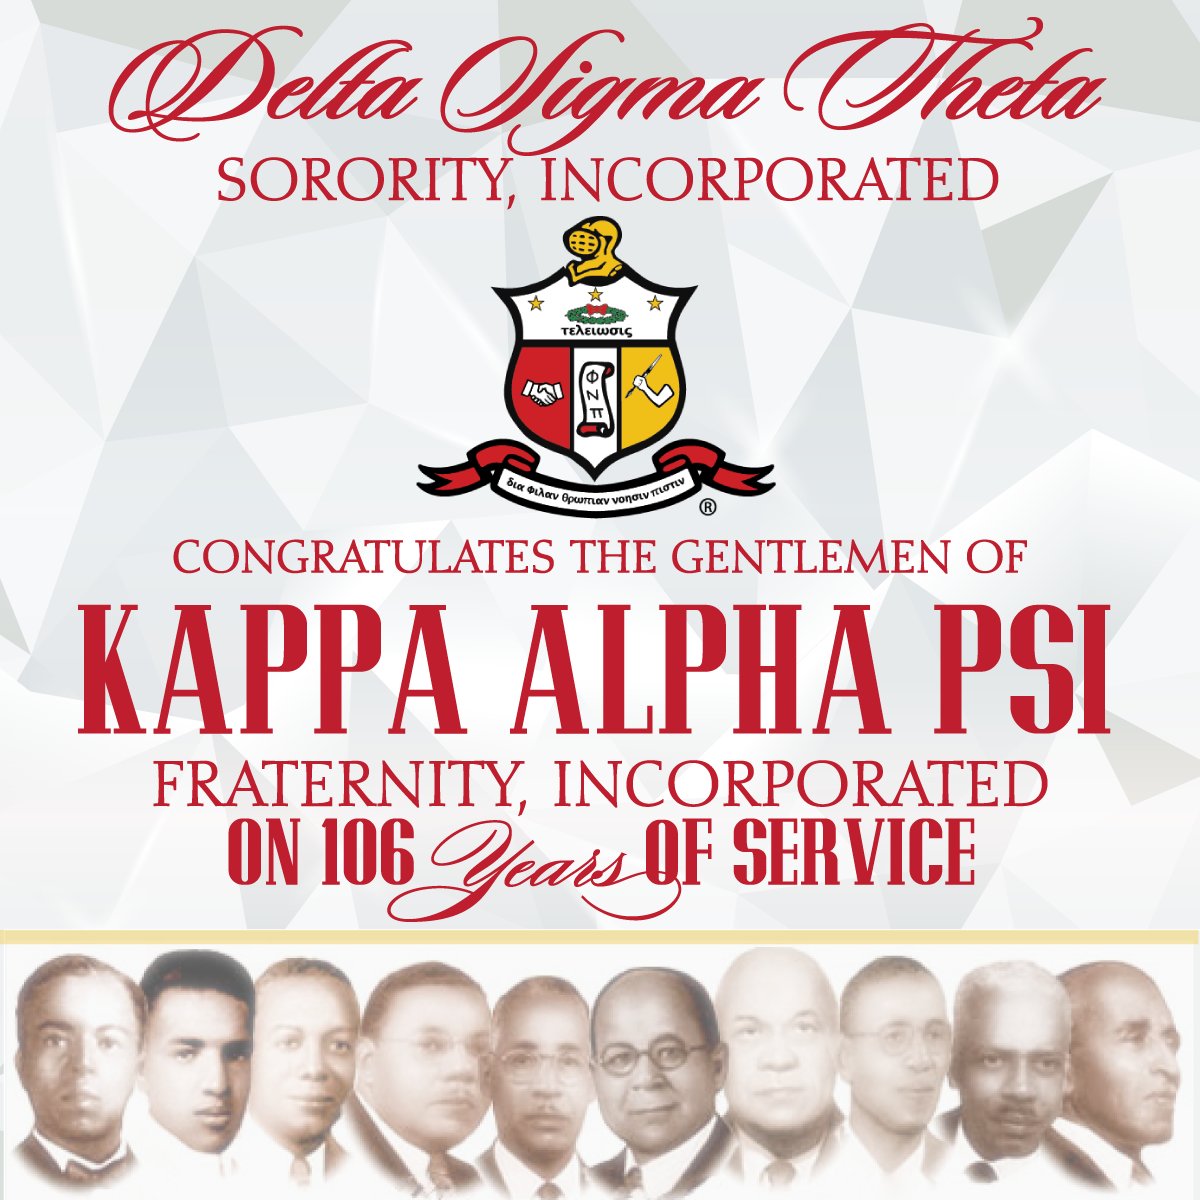 dstinc1913 on X: "Congratulations to the men of Kappa Alpha Fraternity, Inc. 106 years of service! #Kappa106 https://t.co/882rwhmFSg" / X